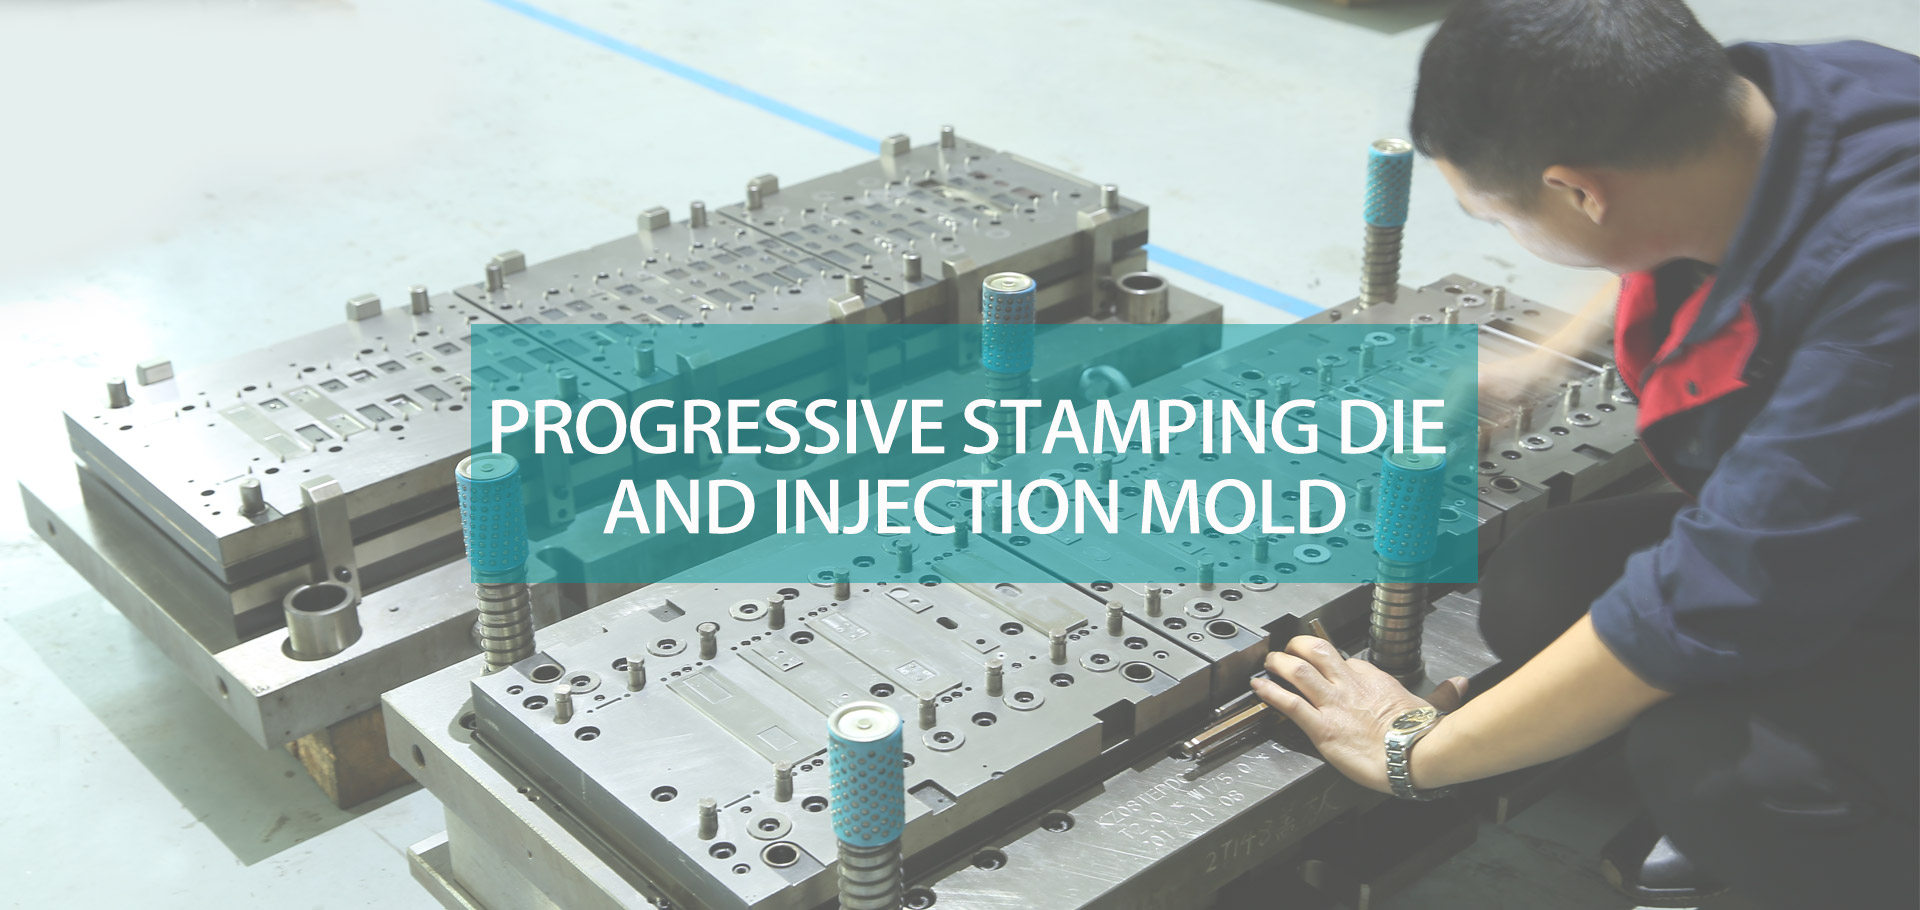 STAMPING DIE AND INJECTION MOULD